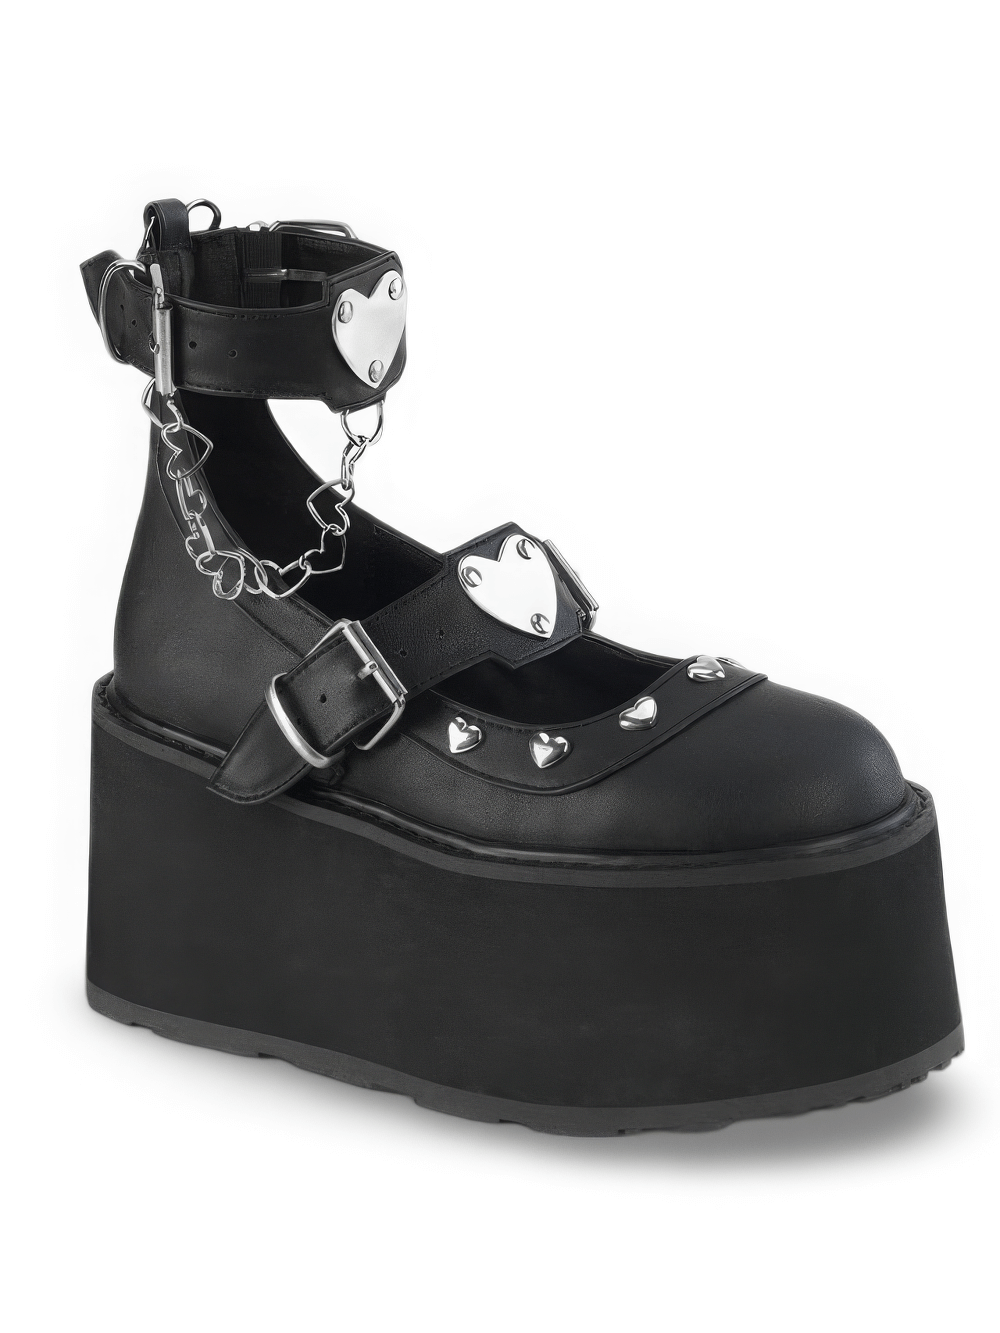 DEMONIA Platform Mary Jane Shoes with Heart Chain and Studs